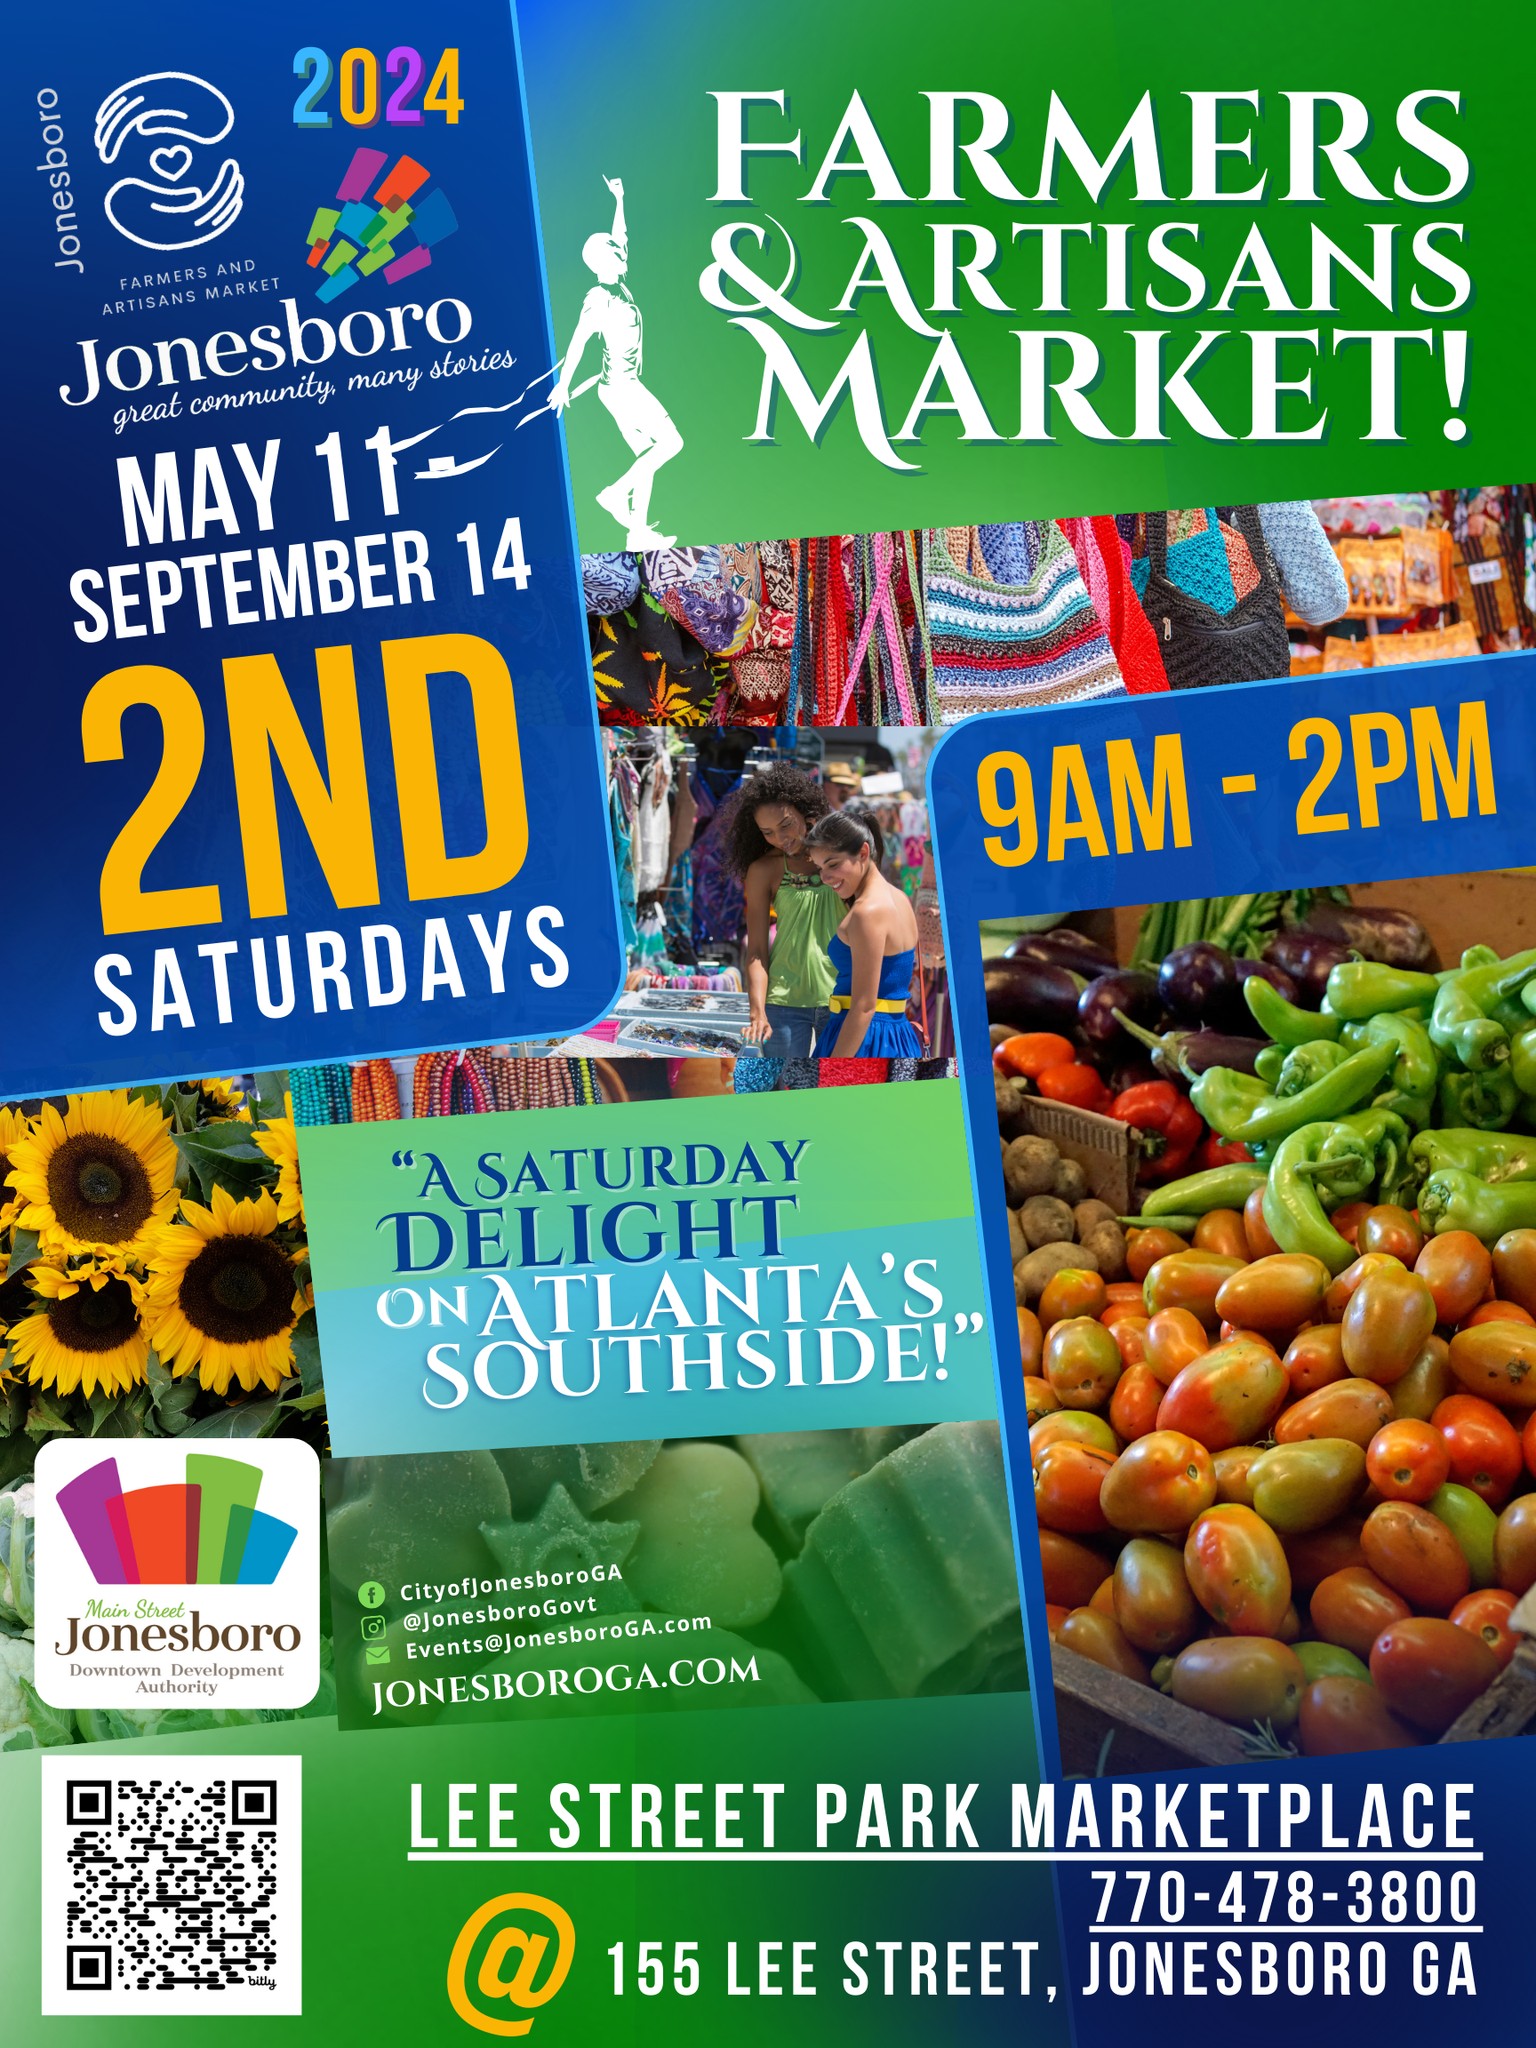 Farmers and Artisans Market - Every 2nd Saturday